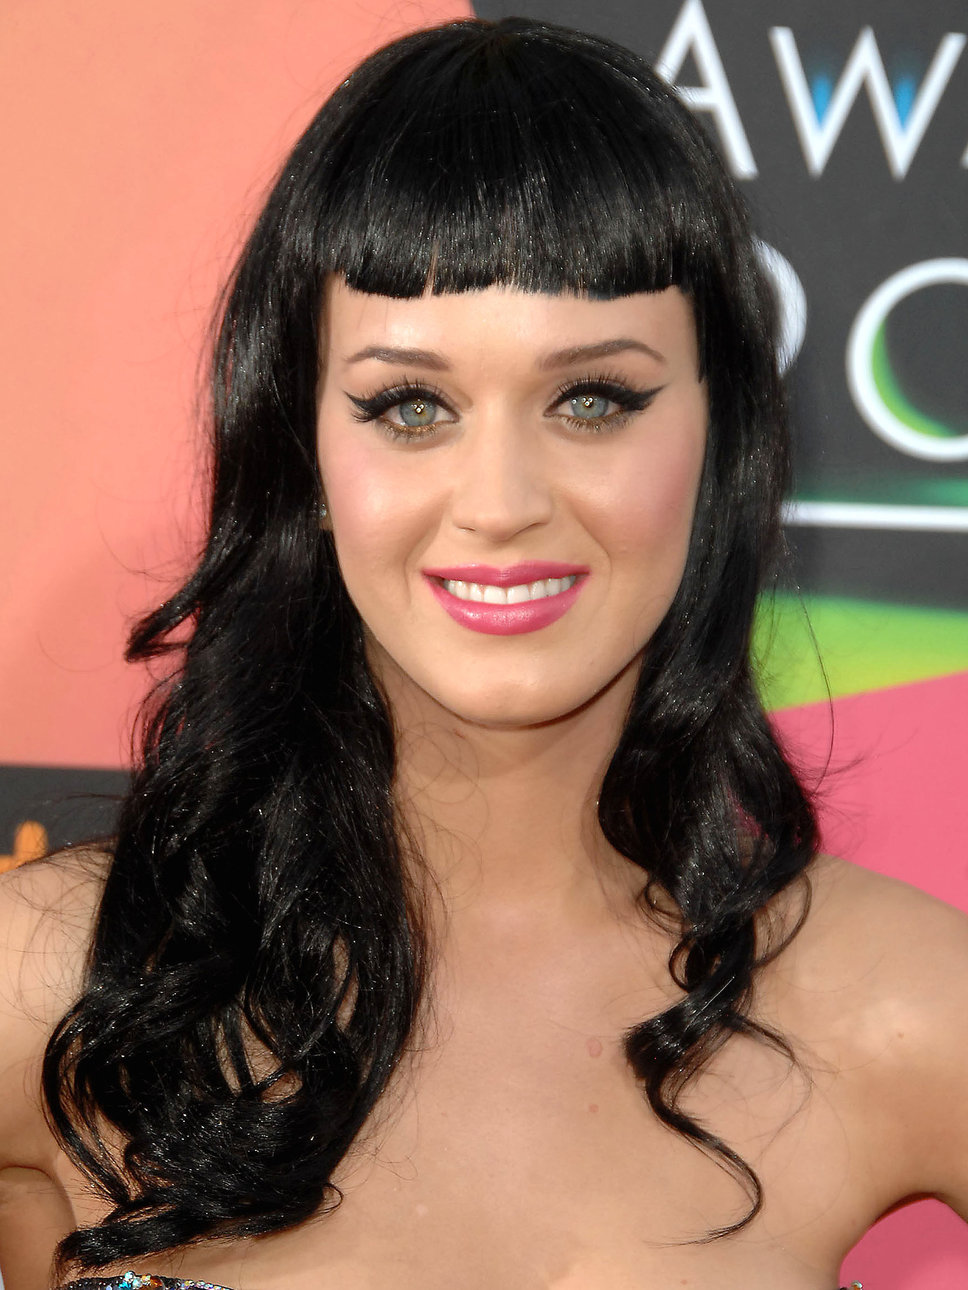 HOLLYWOOD ALL STARS: Katy Perry Bio, Profile, Discography, Filmography ...